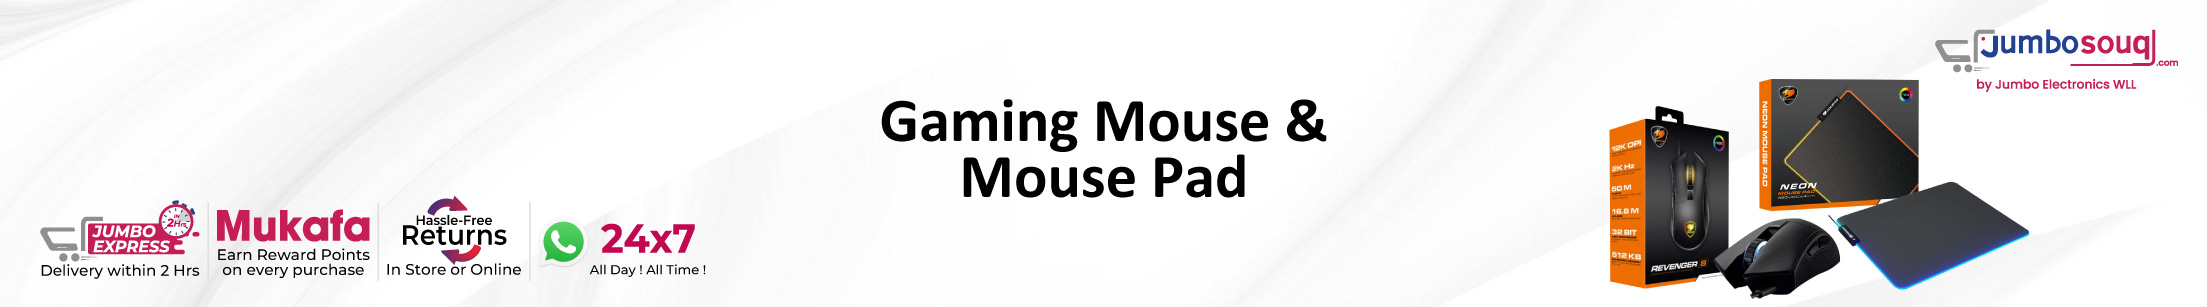 Gaming Mouse & Mouse Pad